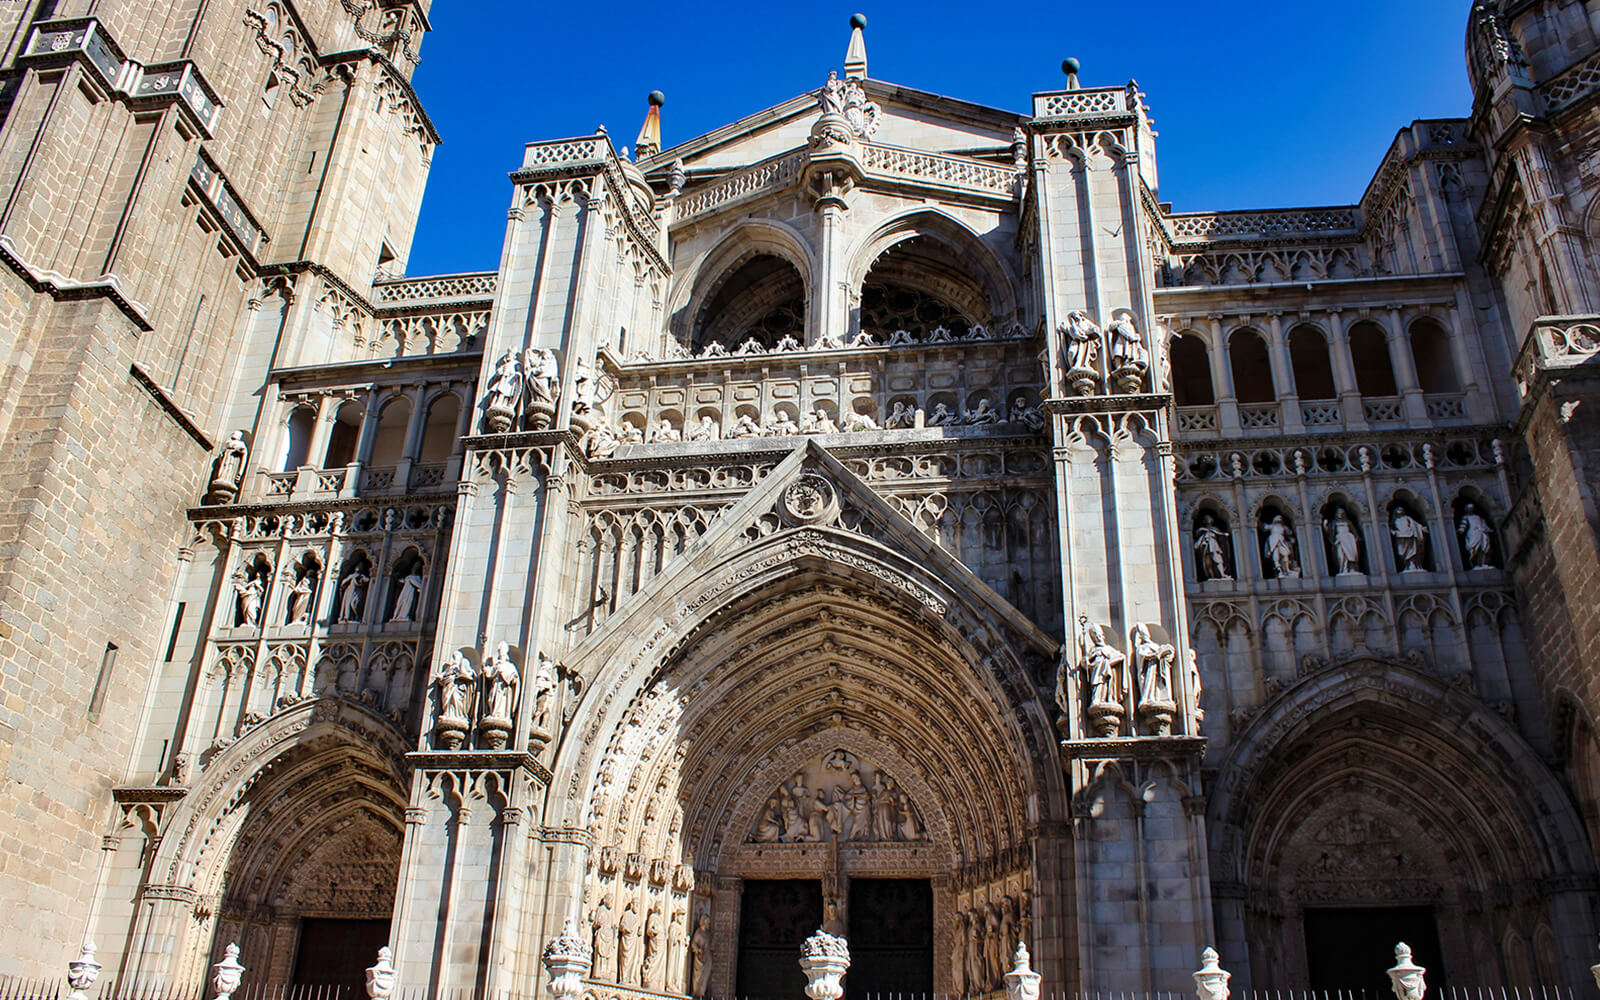 Image of Toledo Guided tour with Optional Cathedral Visit